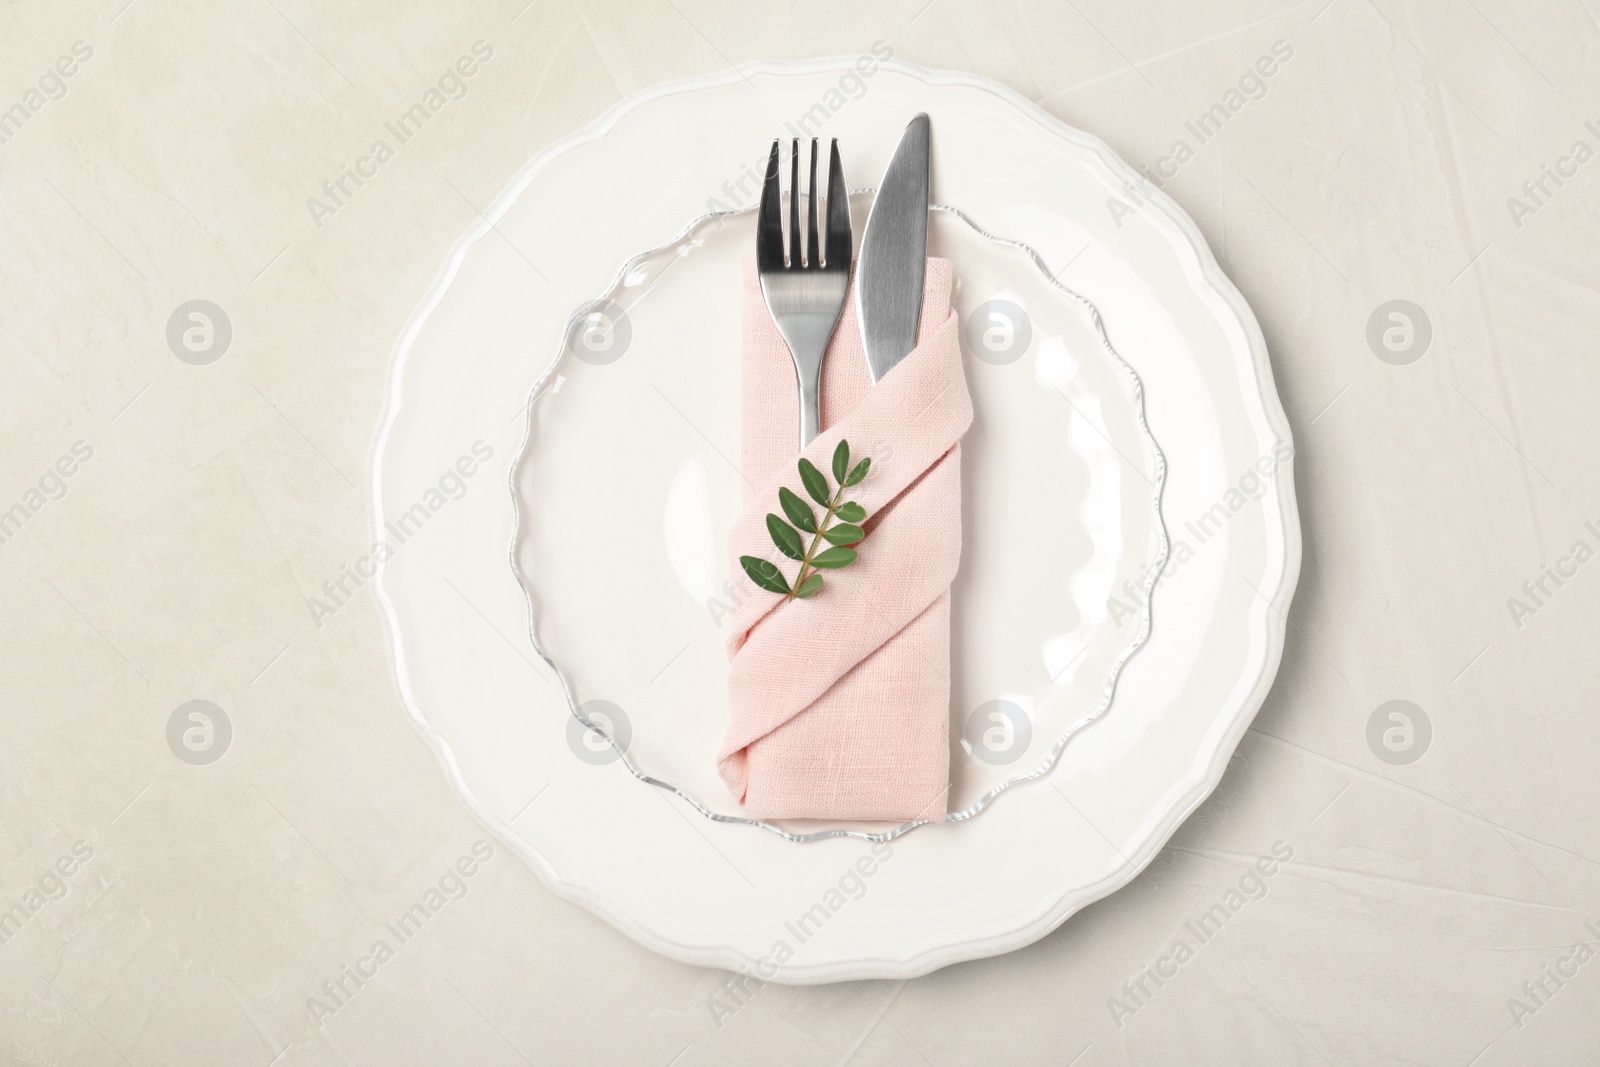 Photo of Plate, cutlery and napkin on light background, top view